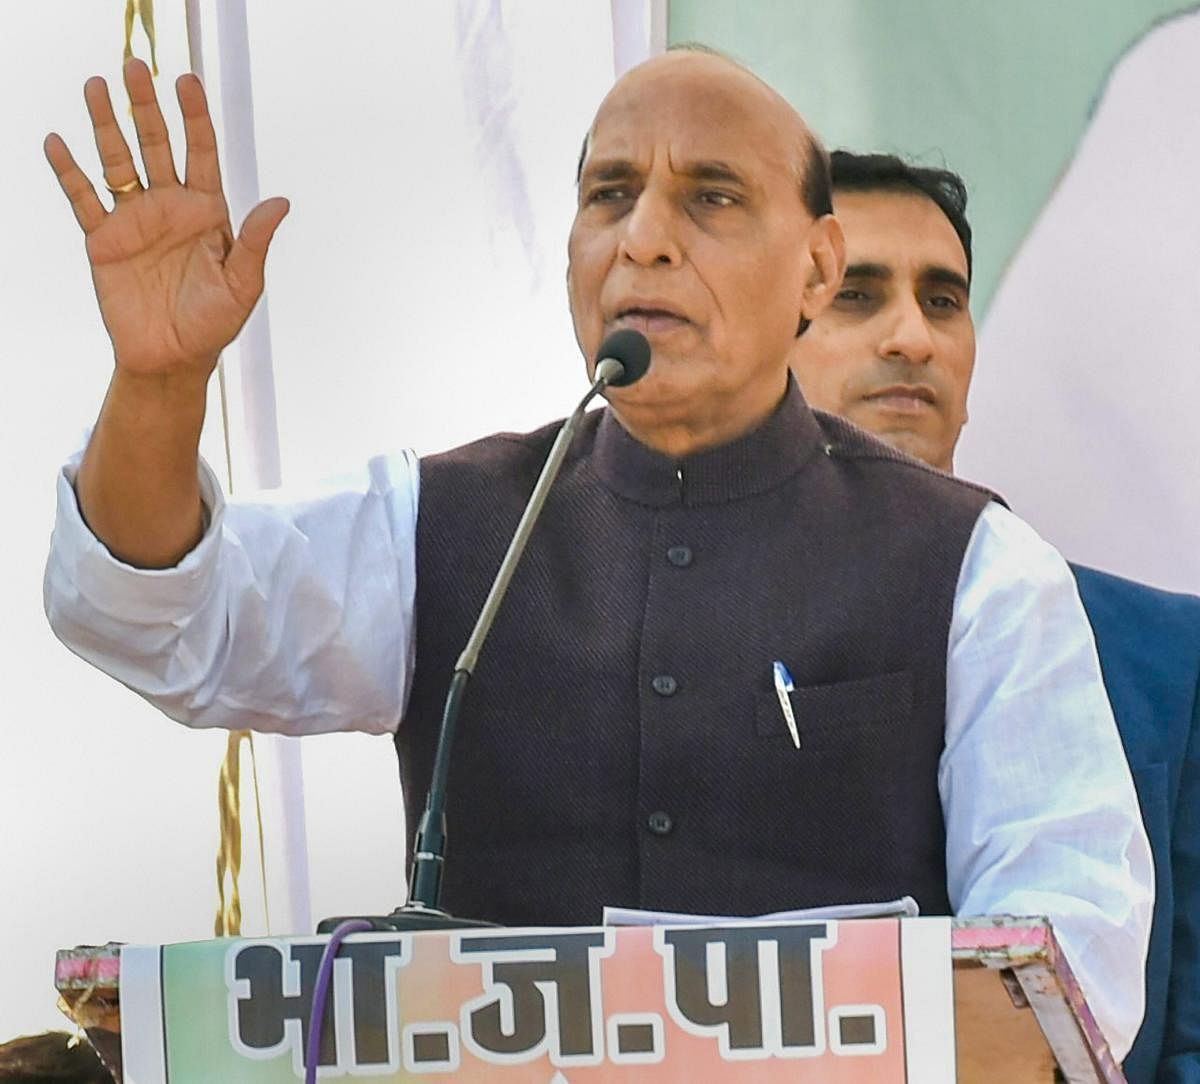 Home Minister Rajnath Singh said Pakistan could seek India's help if it cannot handle the fight against terrorism alone. PTI file photo